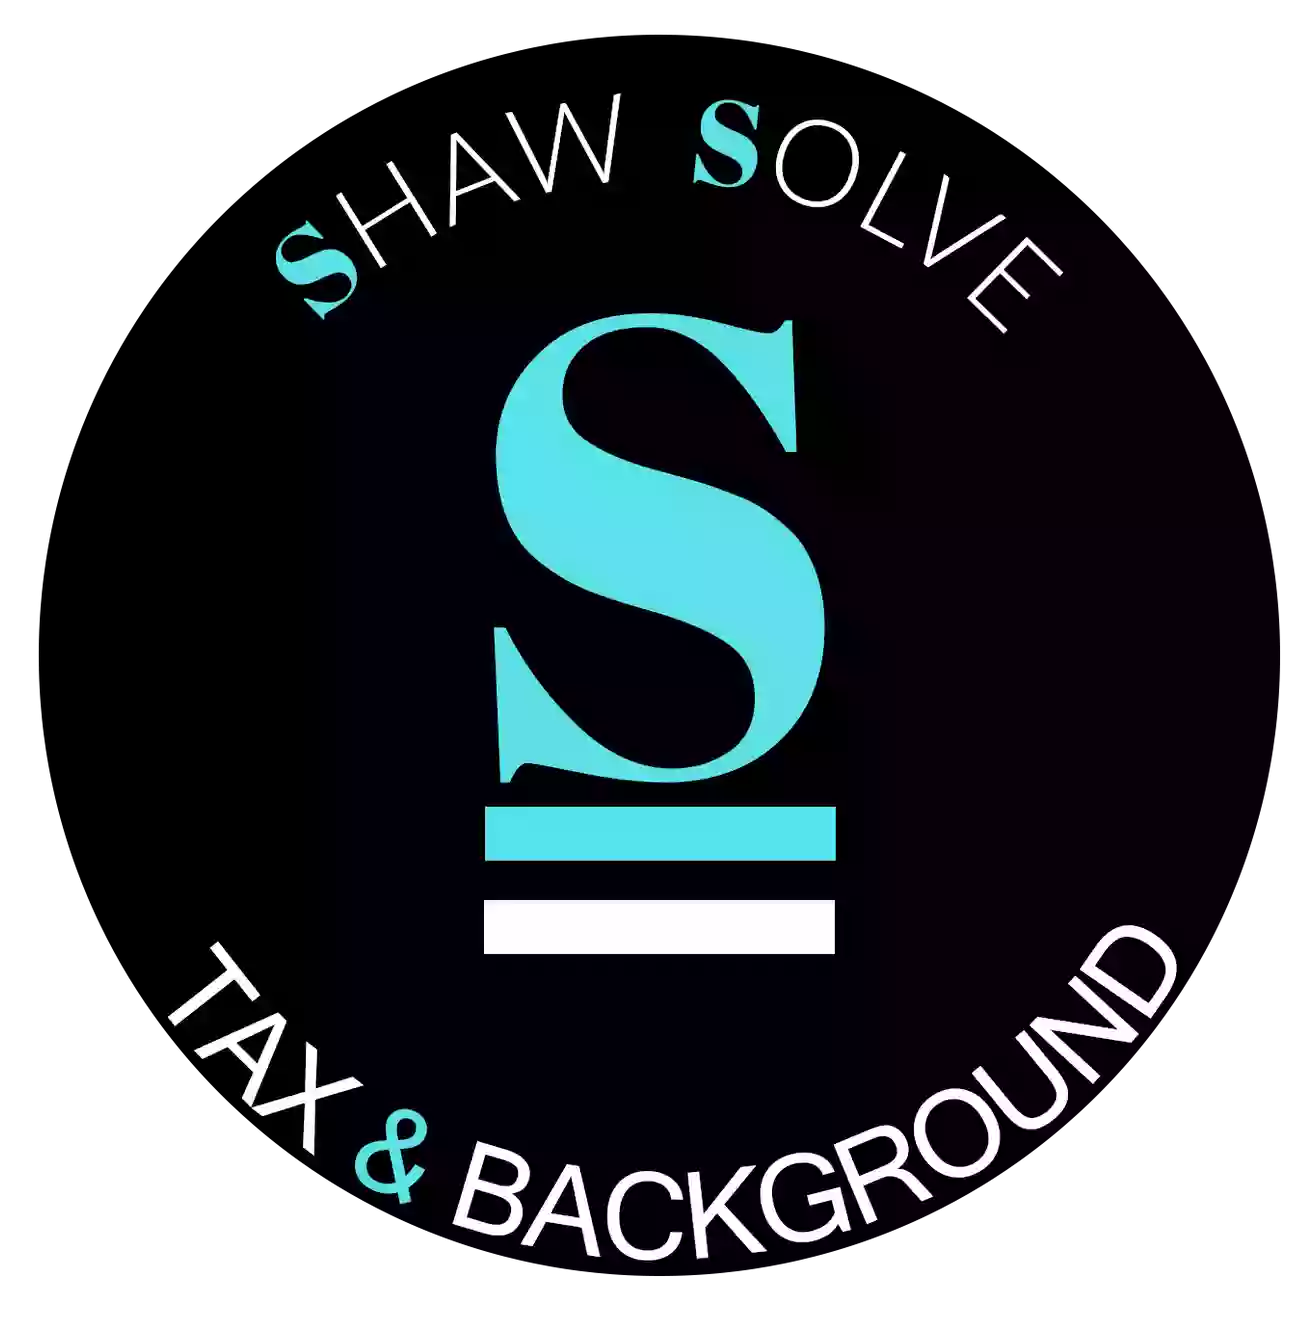 Shaw Solve - Mobile Fingerprinting in St. Louis | Notary | I-9 Verification| Passport Photos | Tax Preparation| Firearm Apps